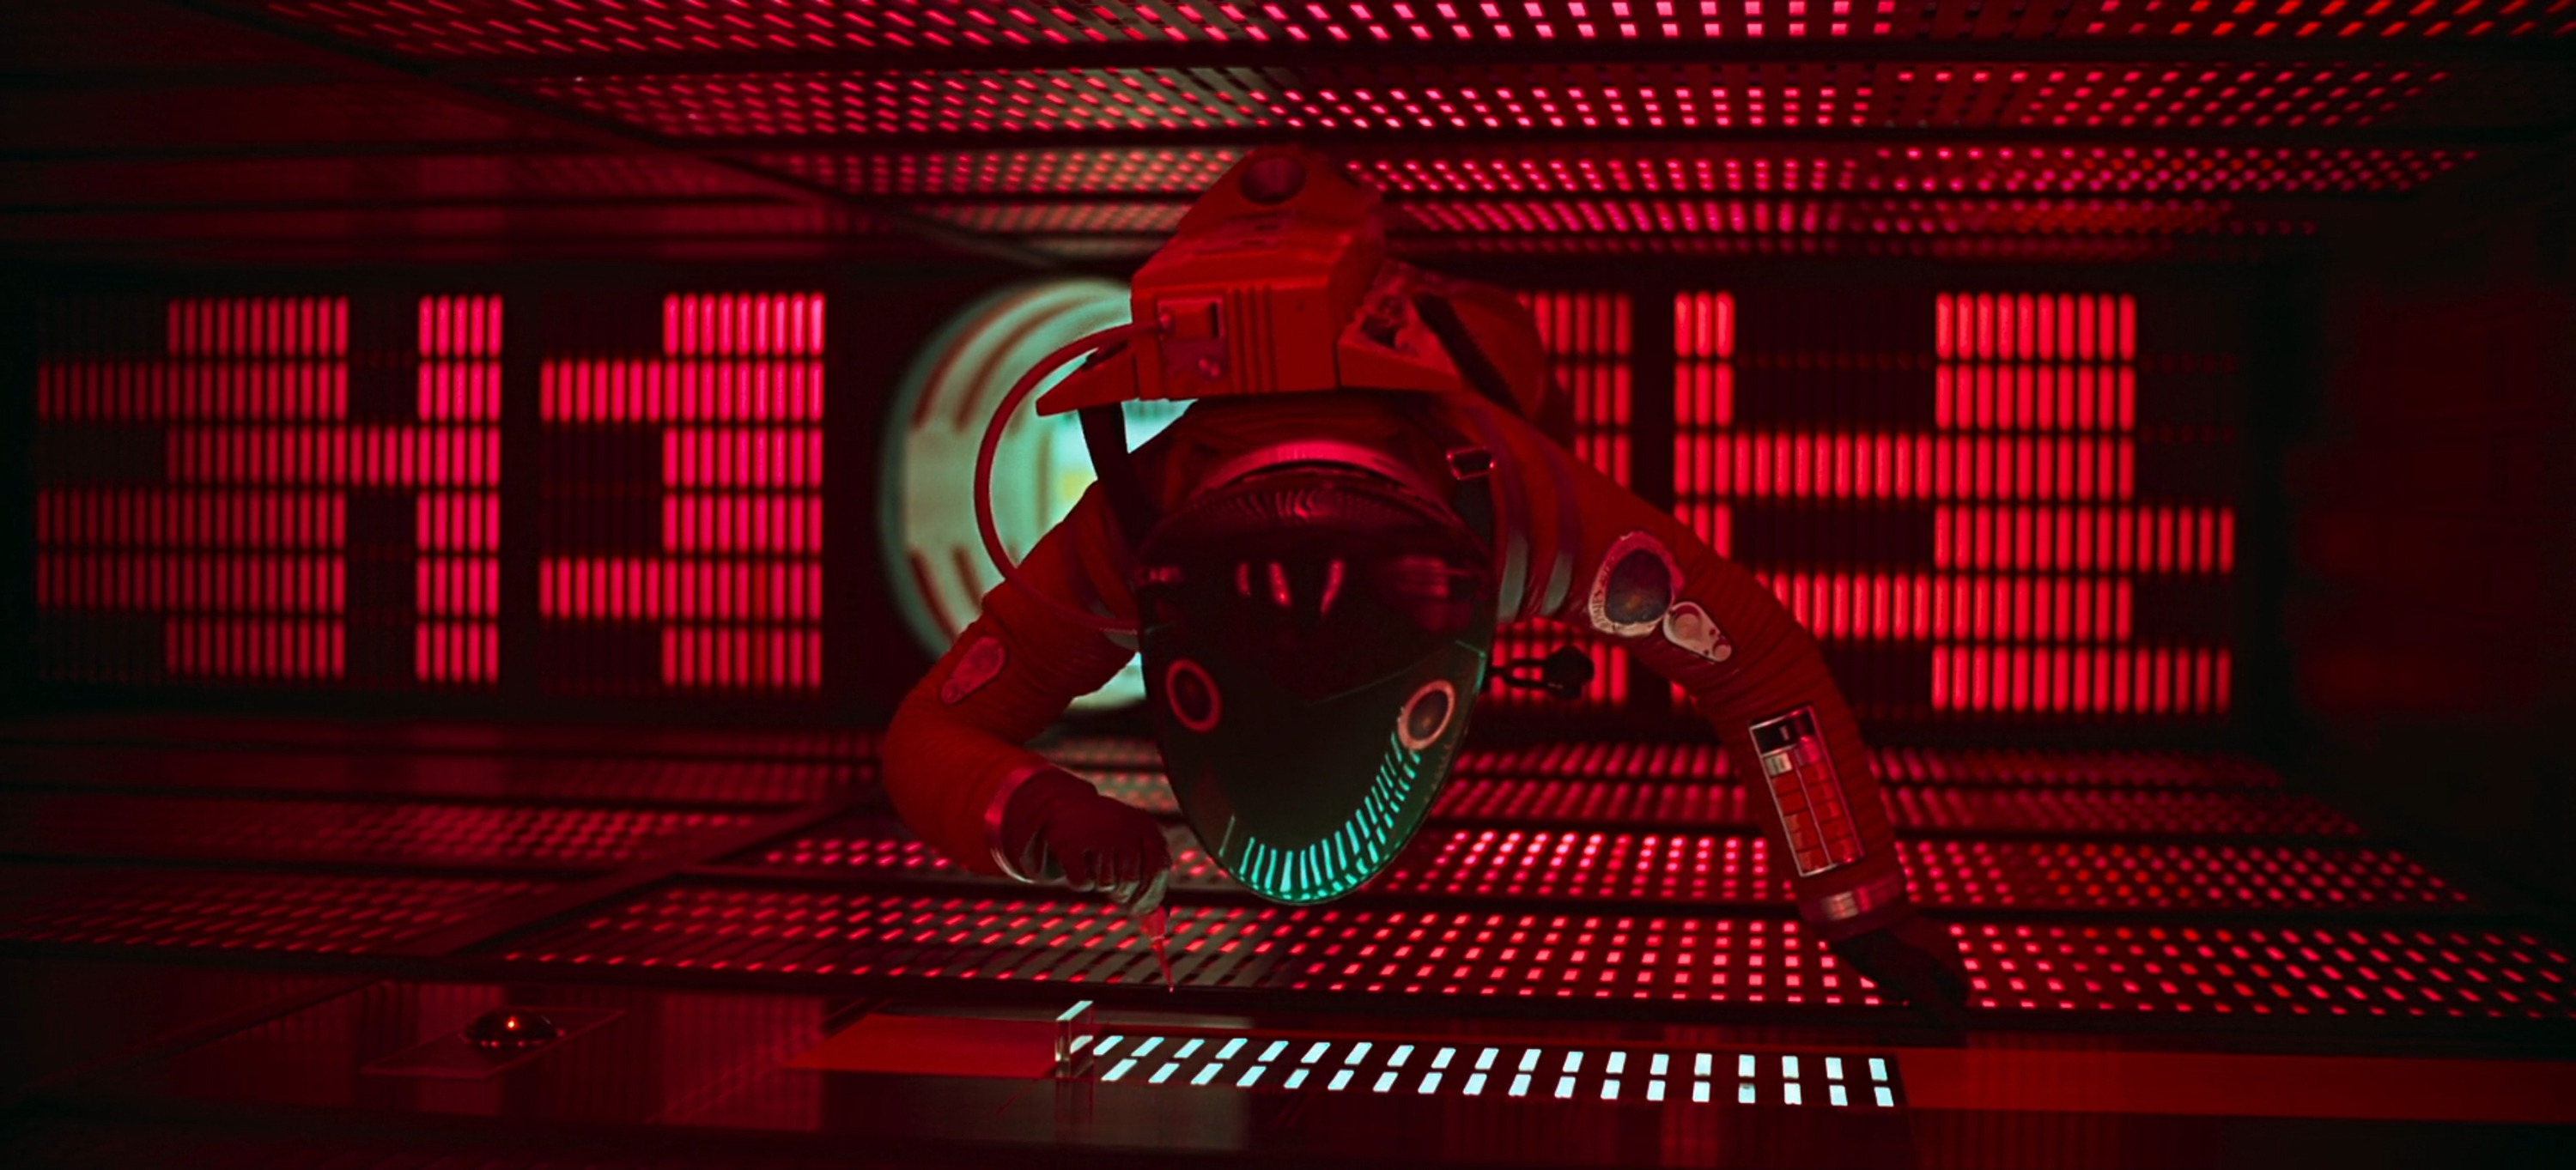 3000x1363 2001: A Space Odyssey by Stanley Kubrick (653CI) &acirc;&#128;&#148; Atlas of Places